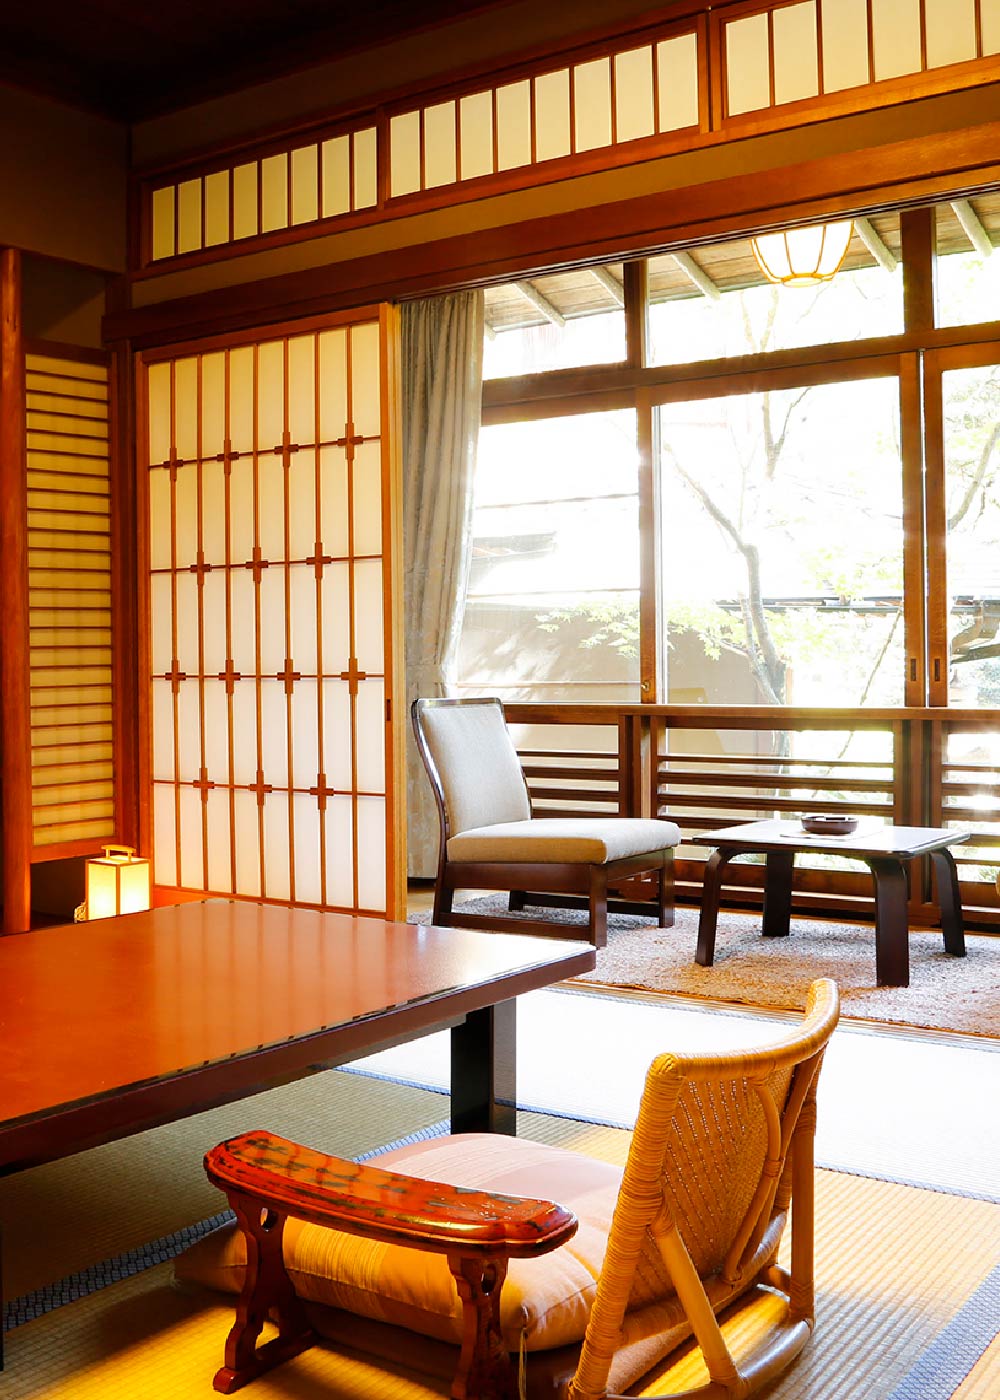 The inside of a traditional ryokan room